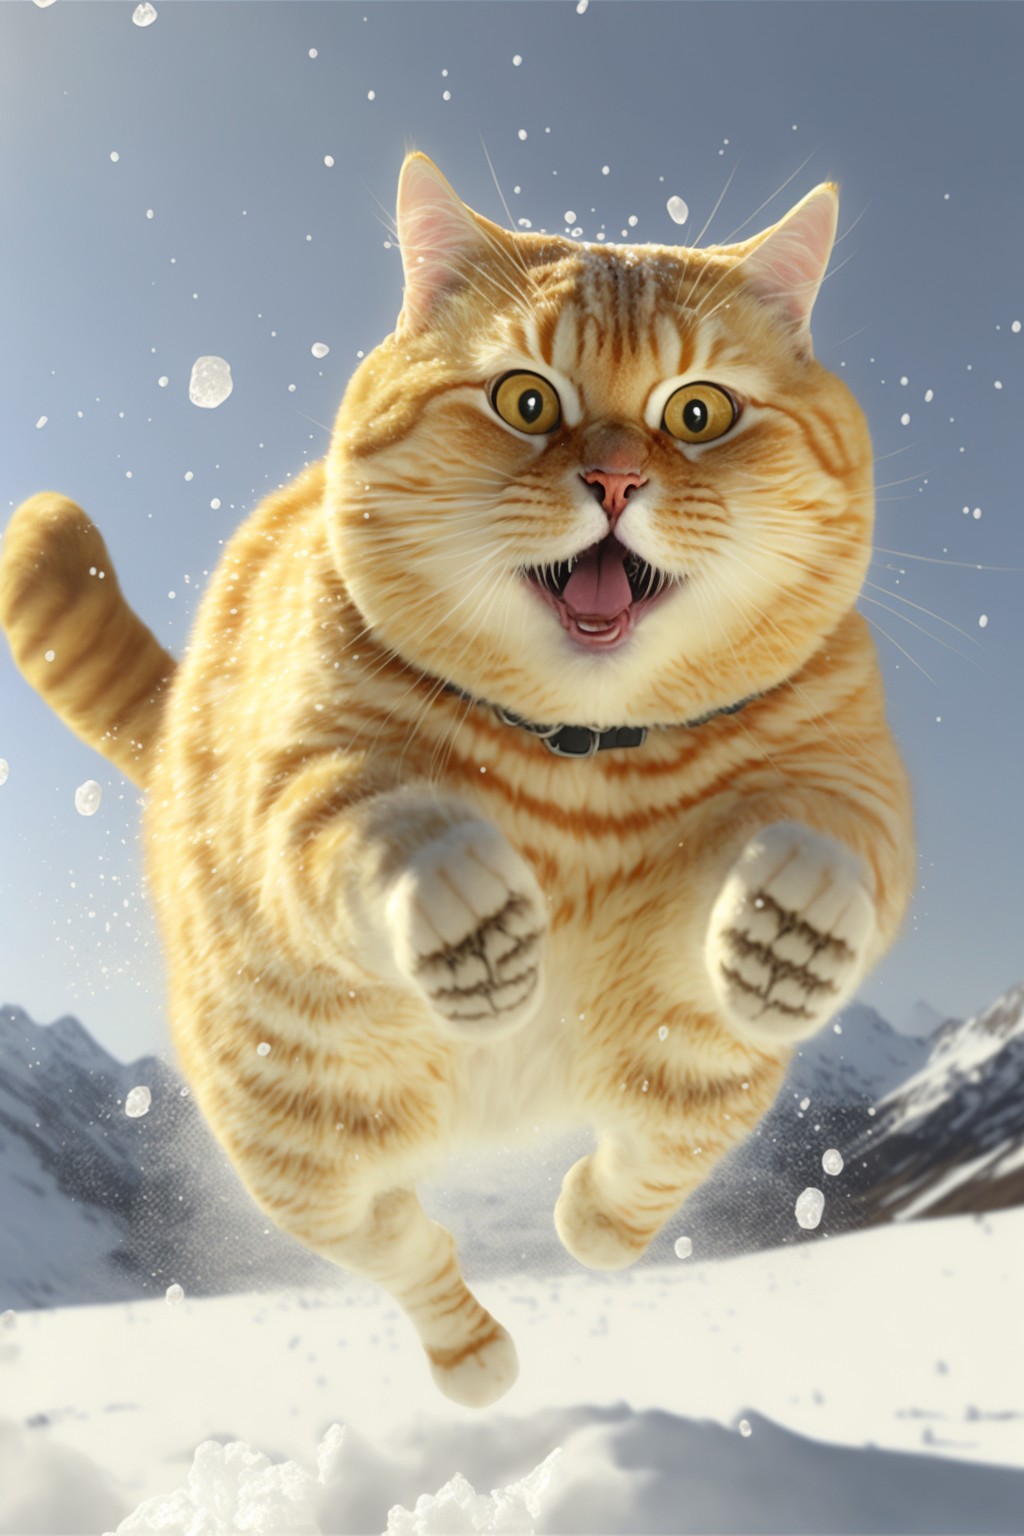 Silly cat jumping happily in the snow